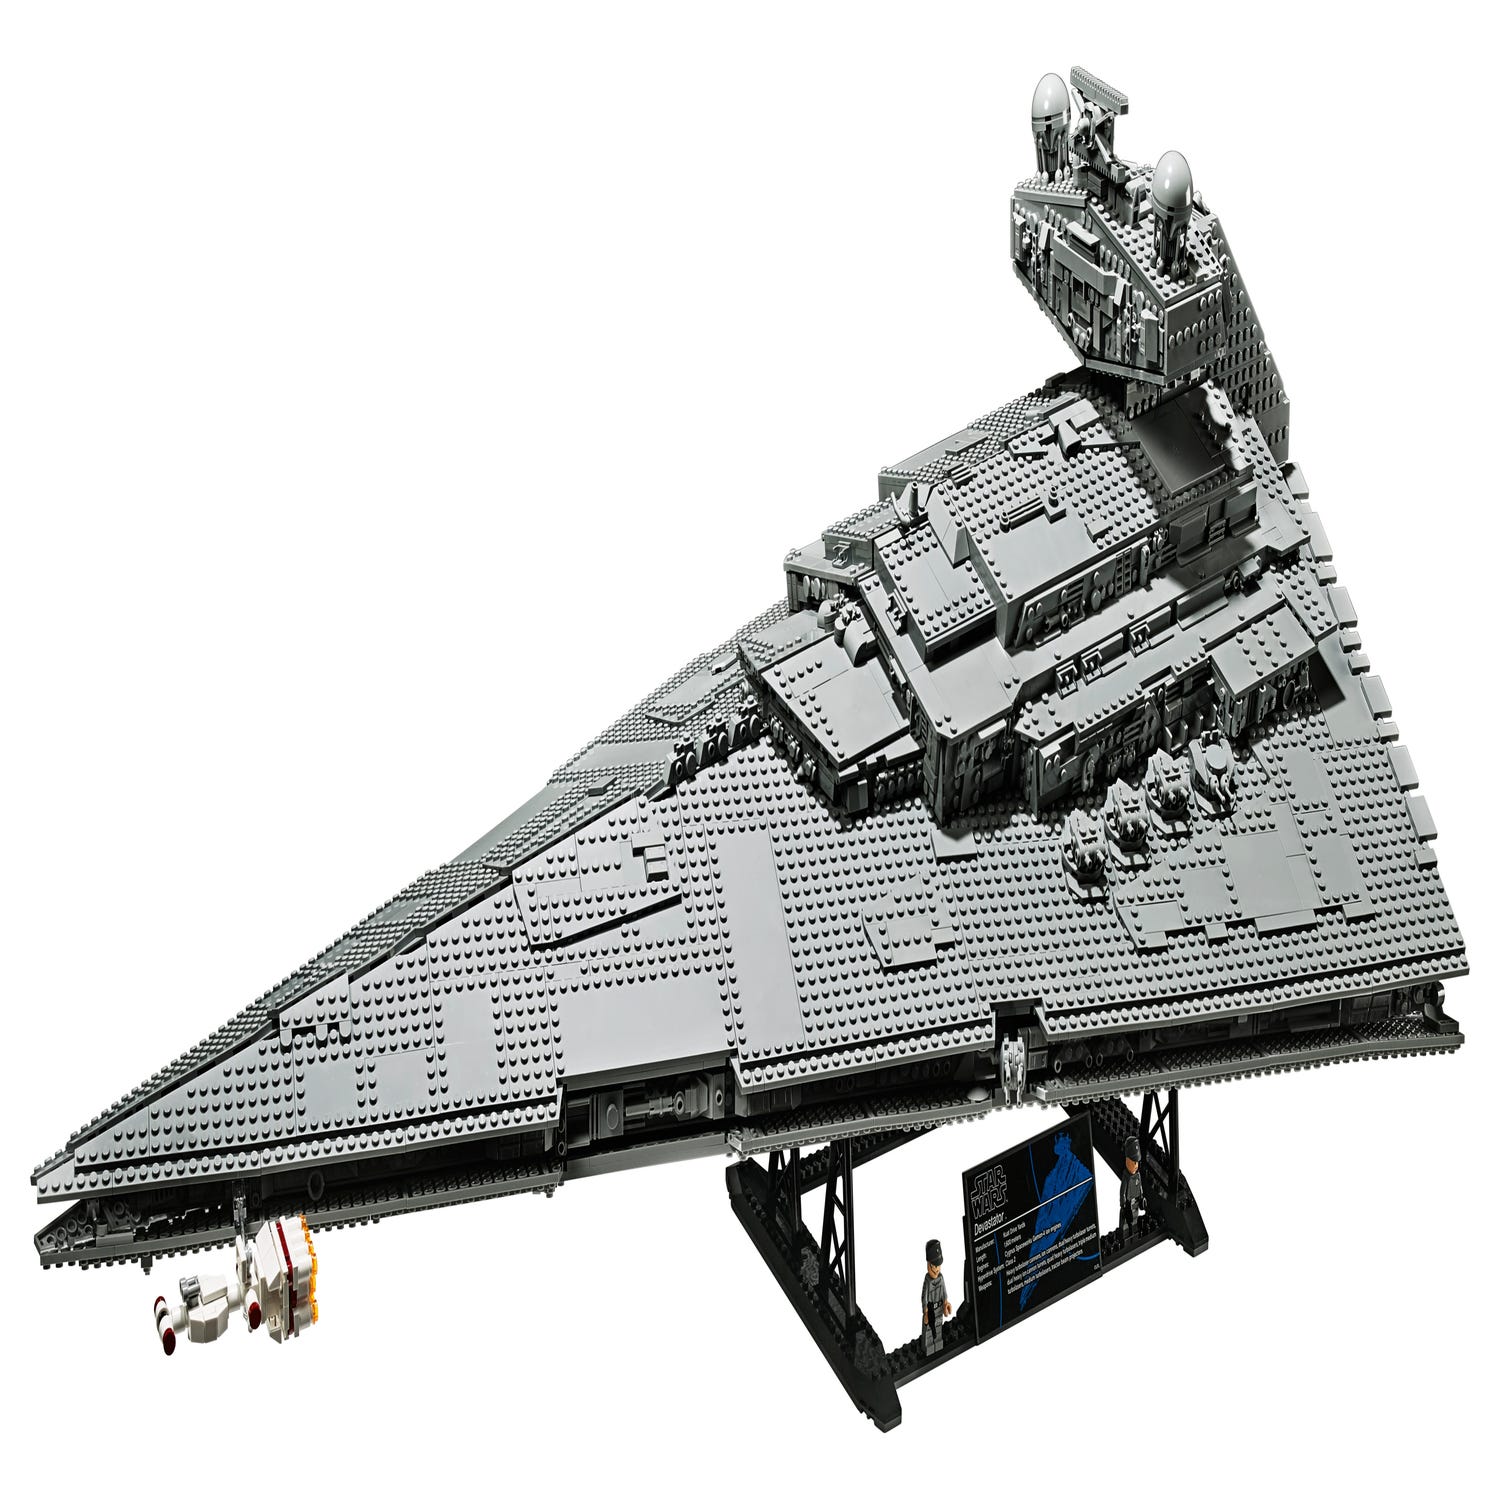 Imperial Star Destroyer™ 75252 | Star Wars™ | online at the Official LEGO® Shop US